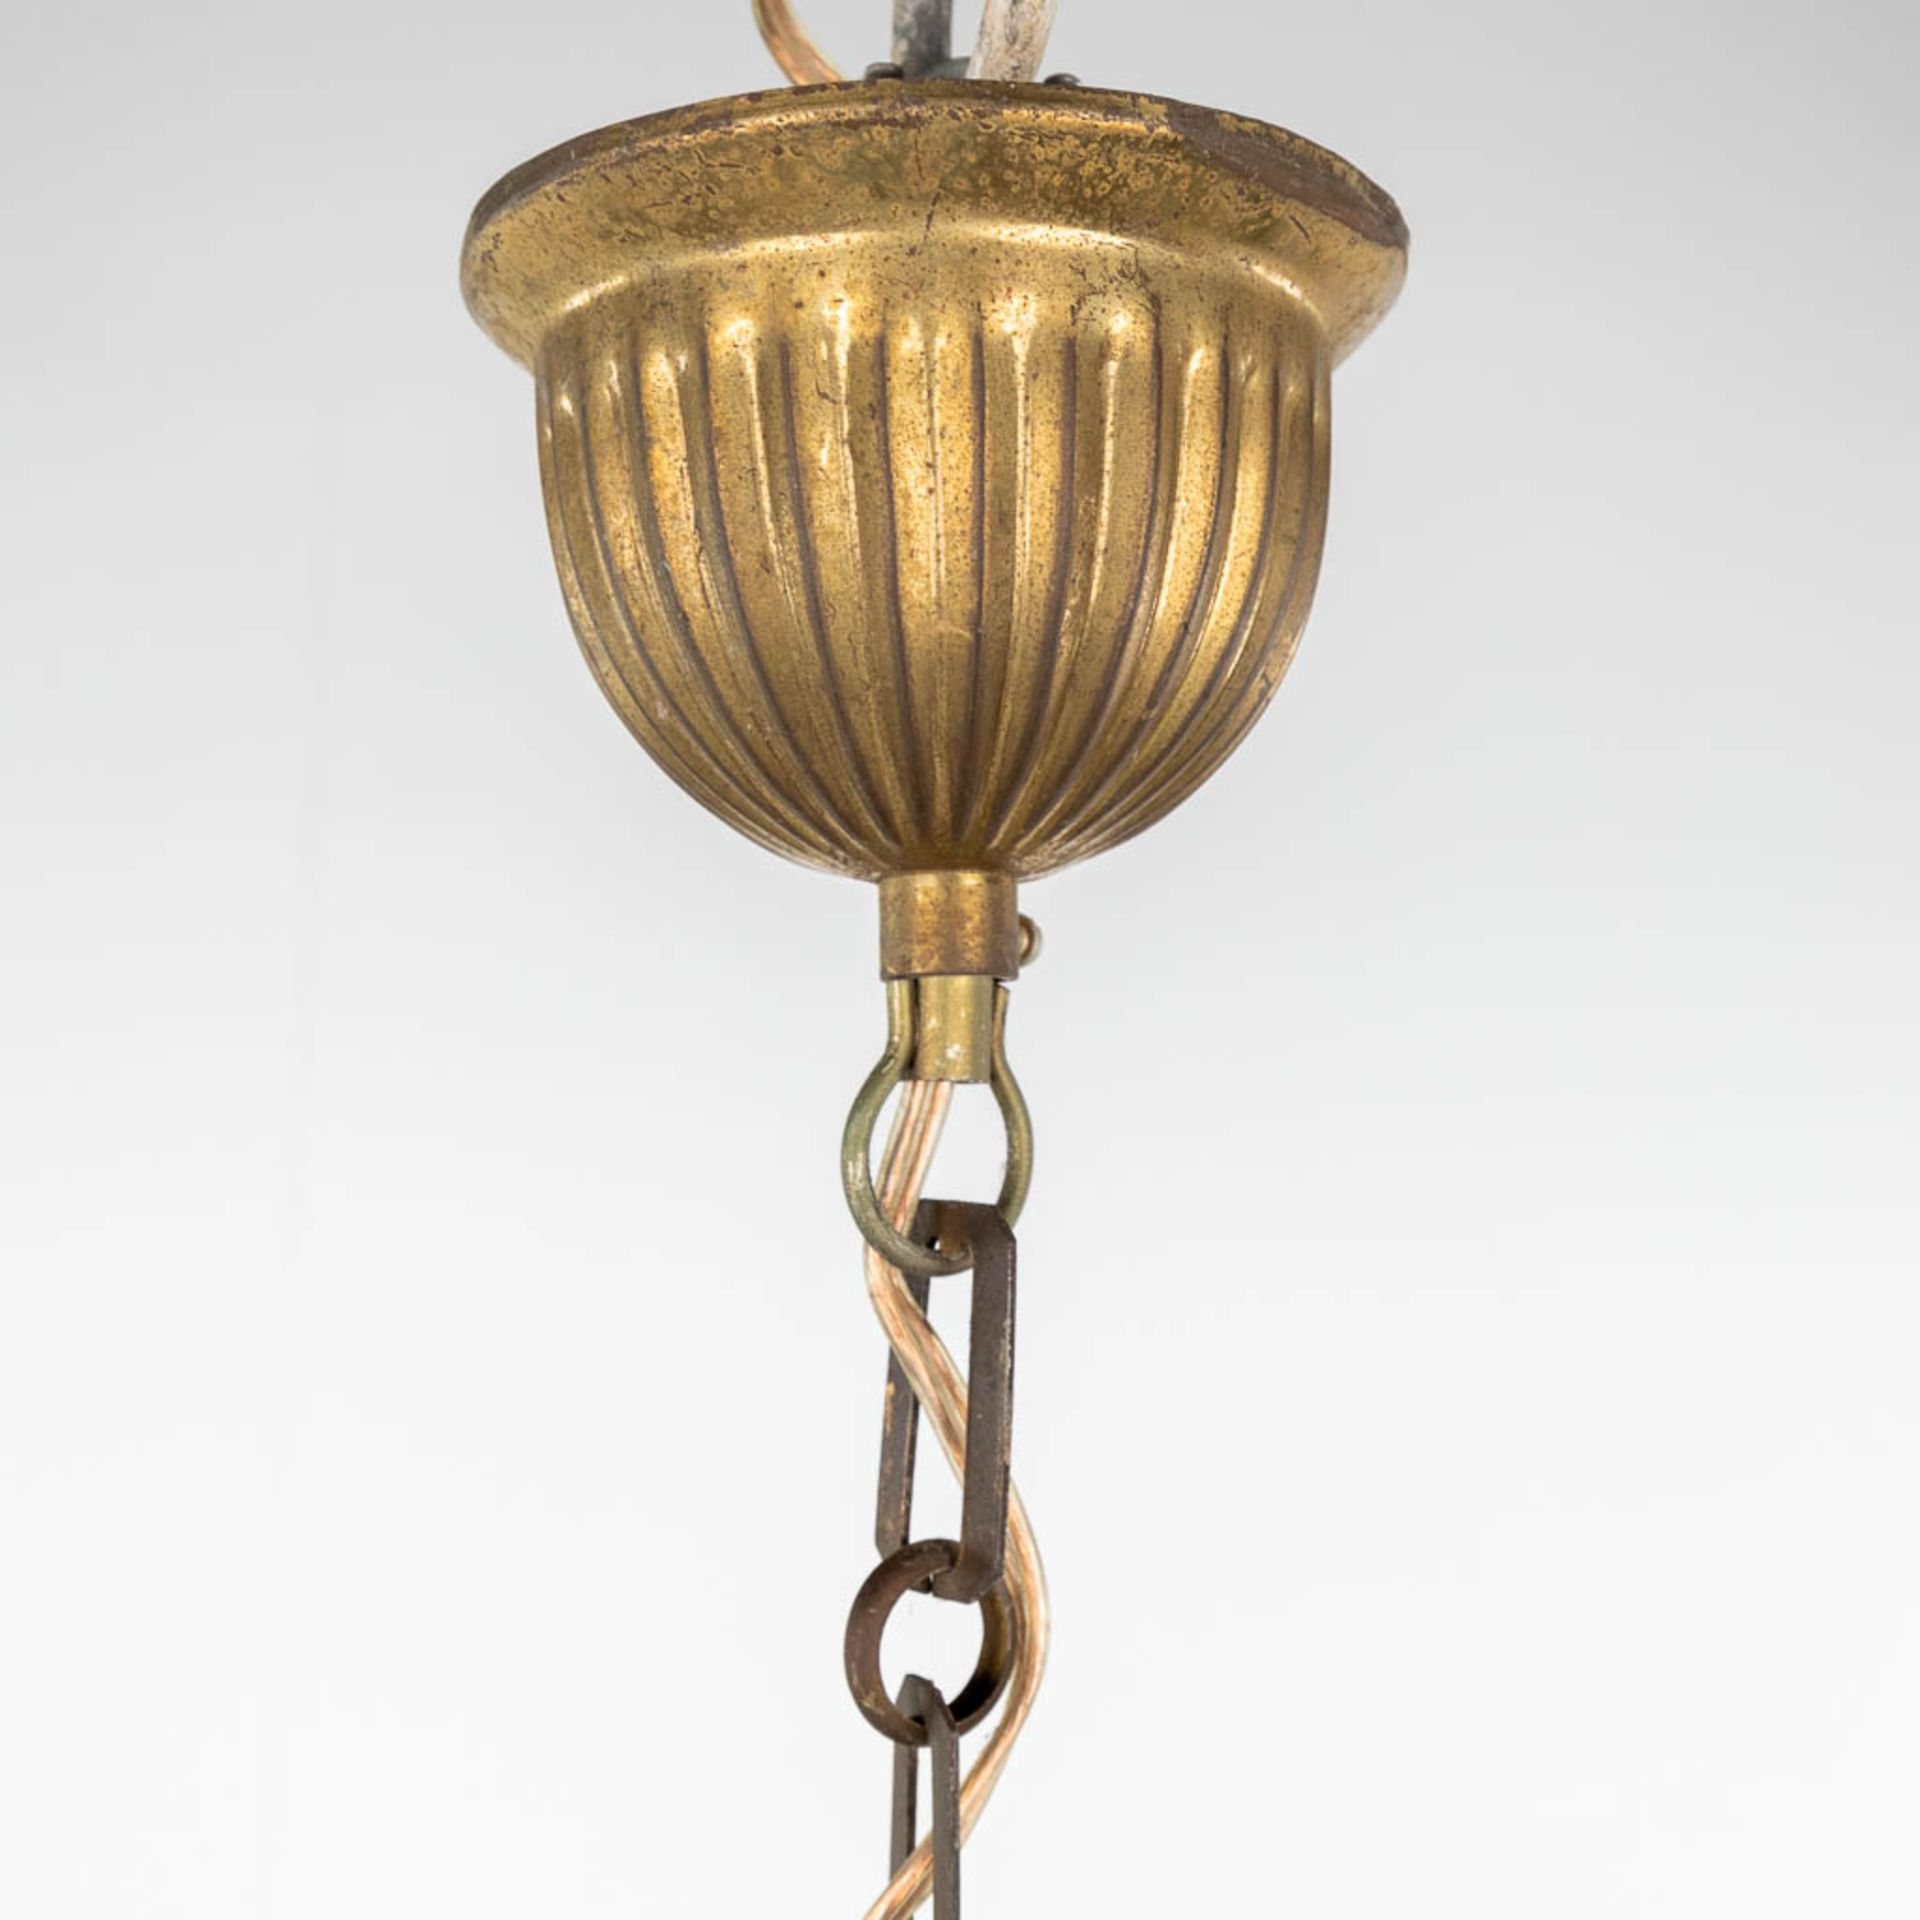 A chandelier 'Sac ˆ Perles', bronze and glass in empire style. 20th C. (H: 100 x D: 50 cm) - Image 10 of 11